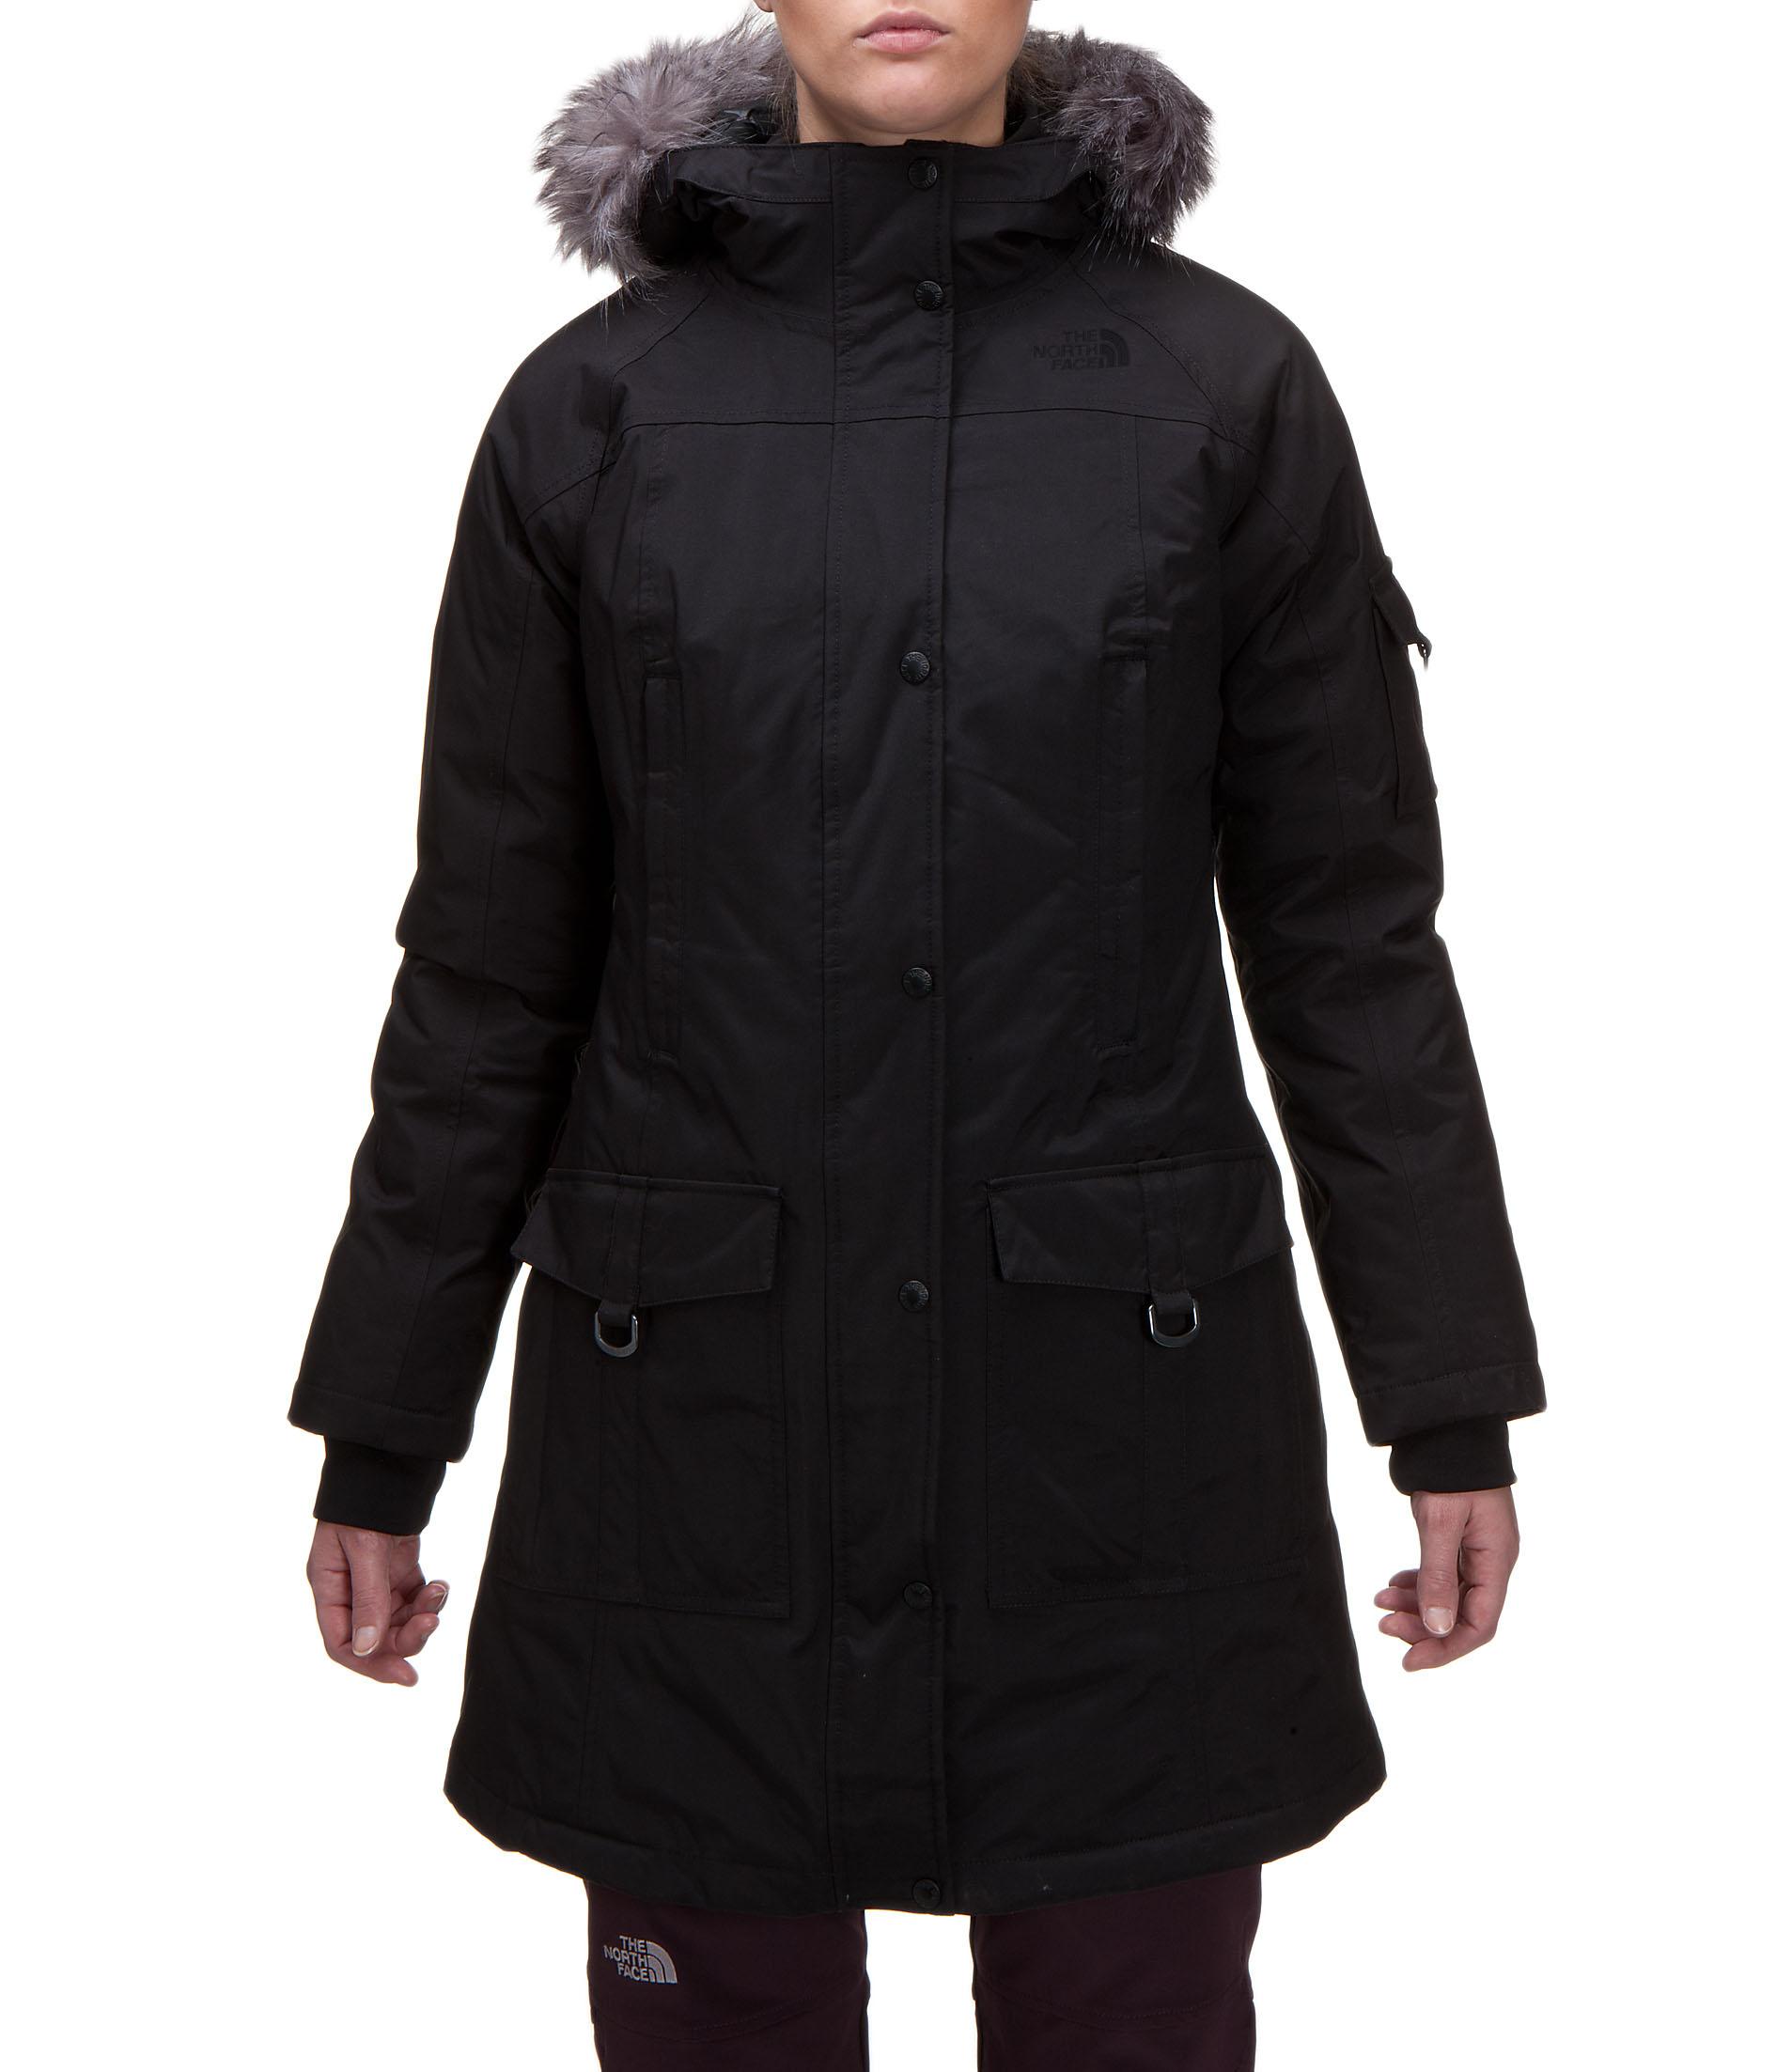 Foto The North Face Women's Insulated Juneau Jacket